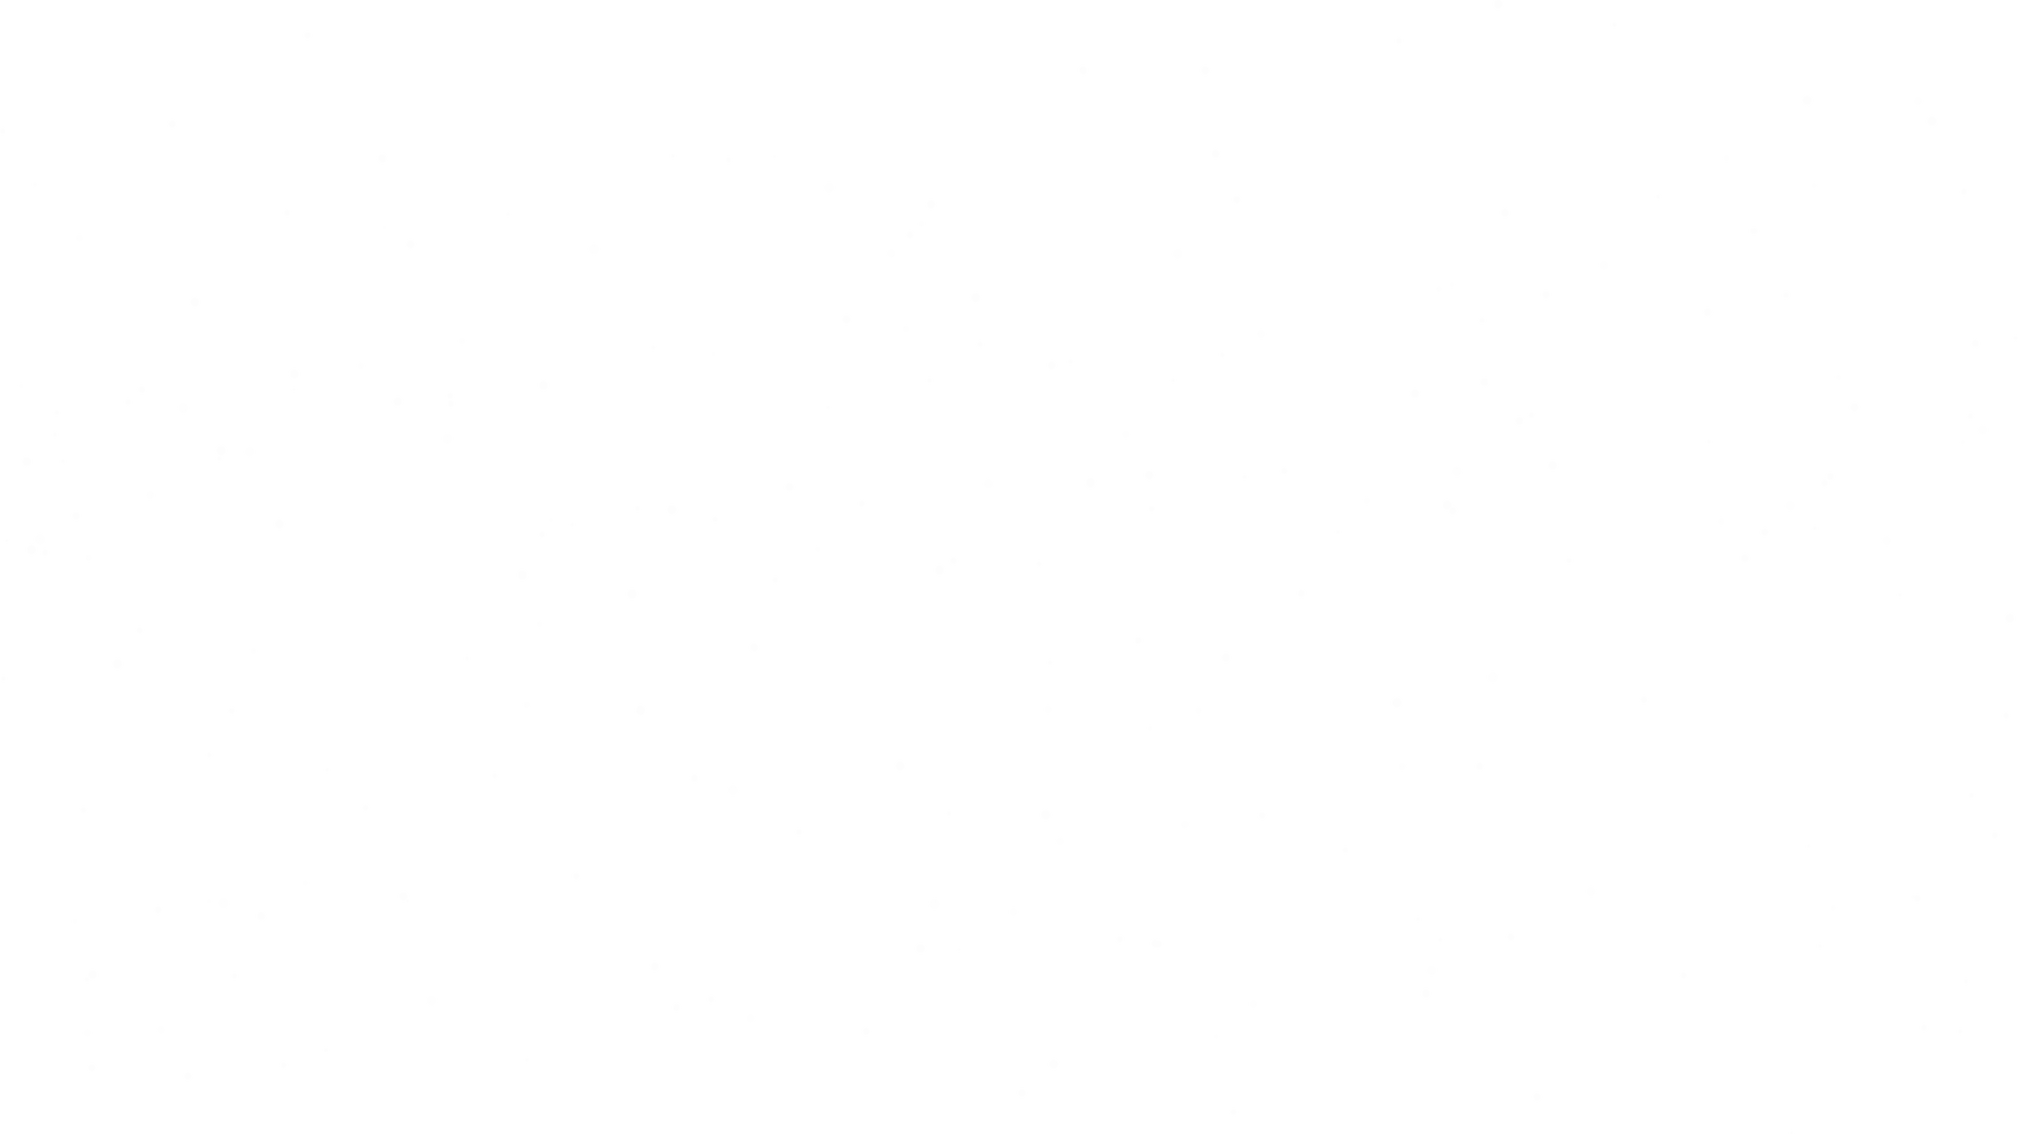 Lots of white dots like stars or snow to overlay.